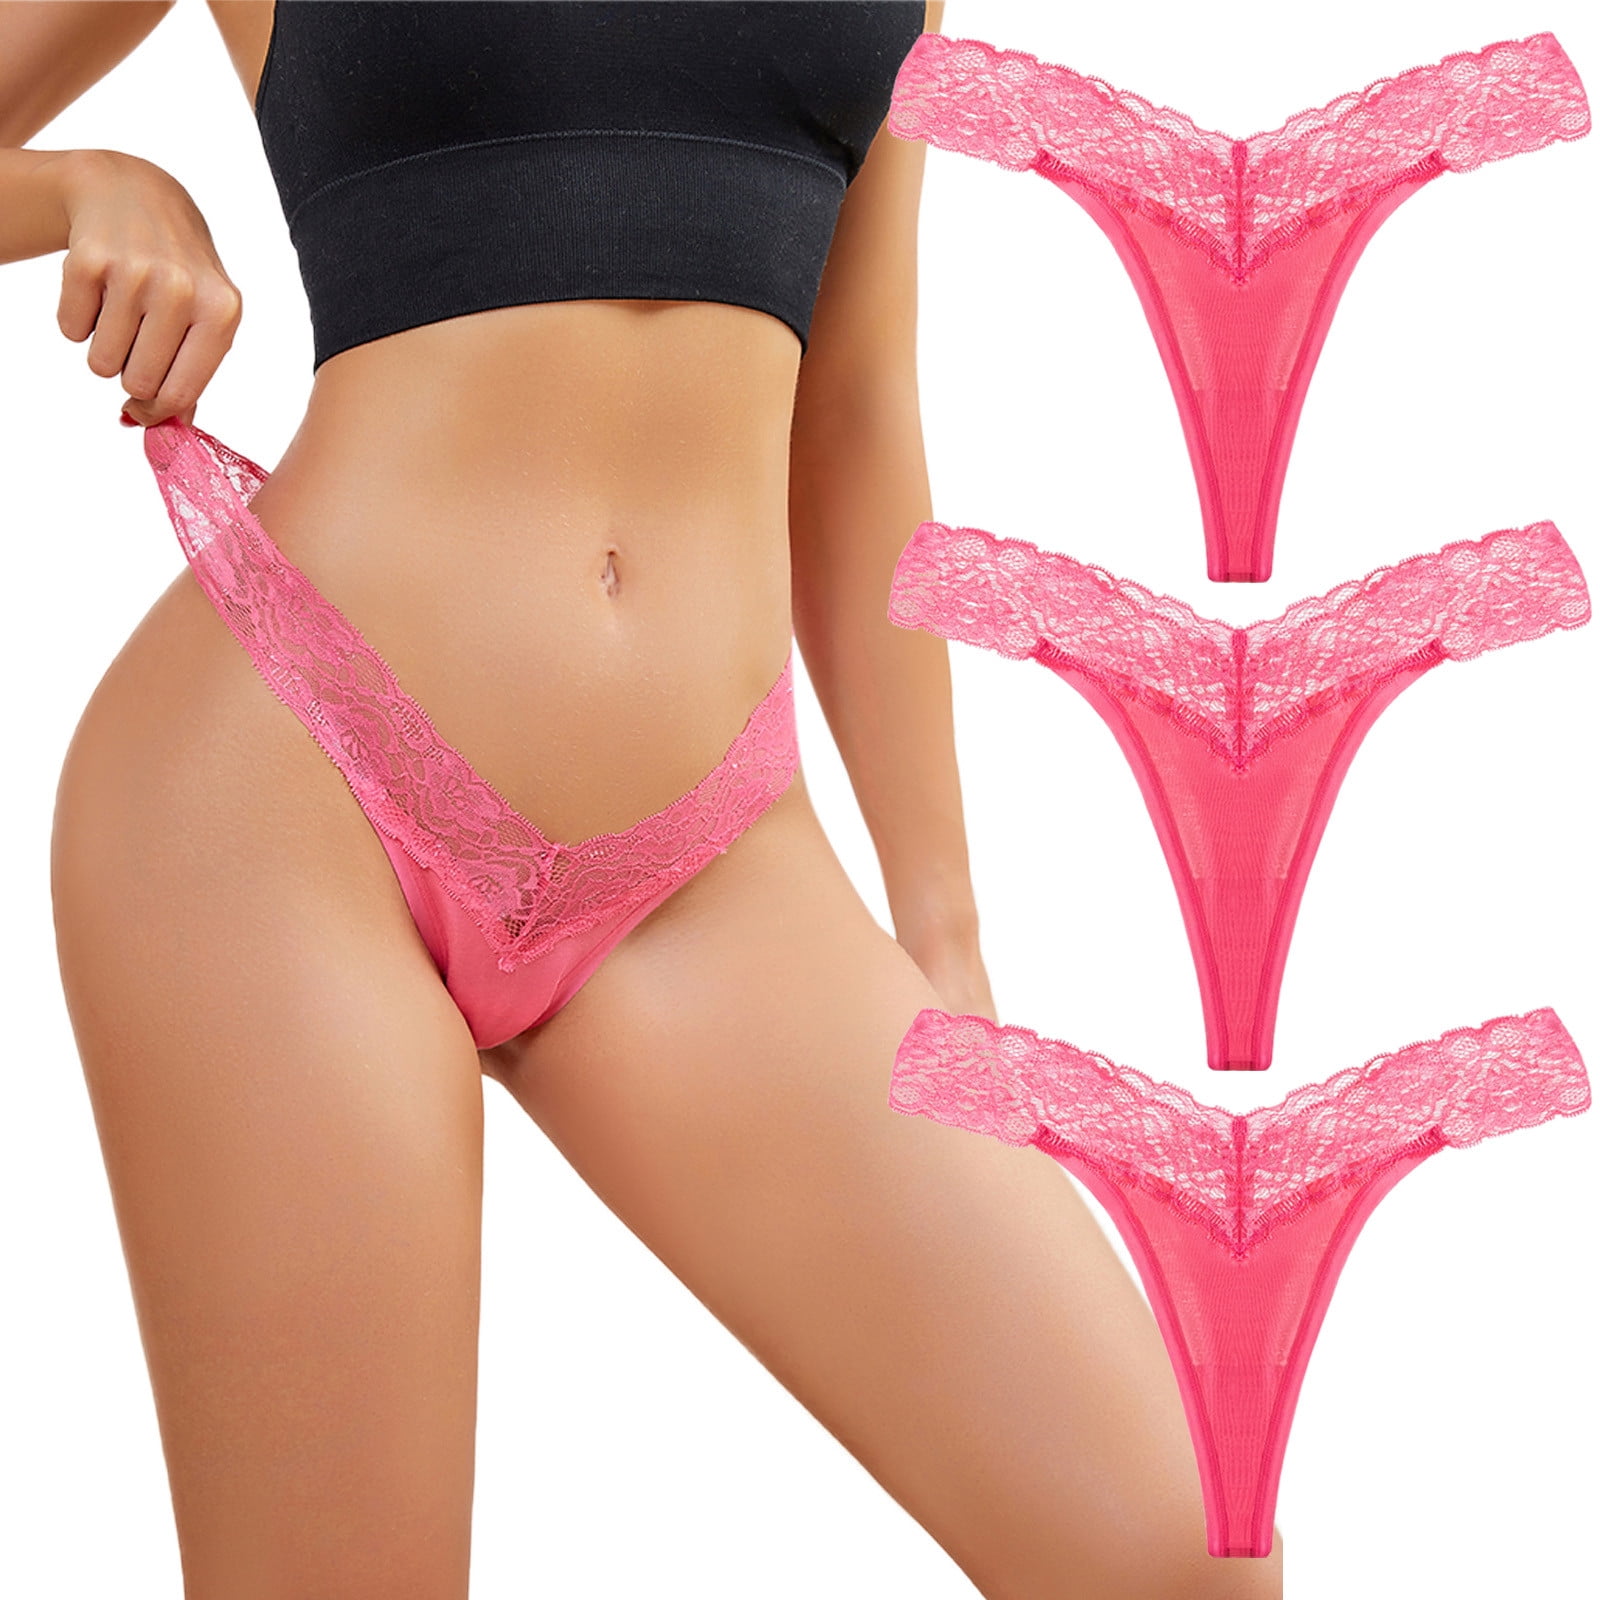 adviicd Panties for Women Pack Lace Underwear for Mid Waist Cotton  Postpartum Ladies Panties Briefs Girls D X-Small